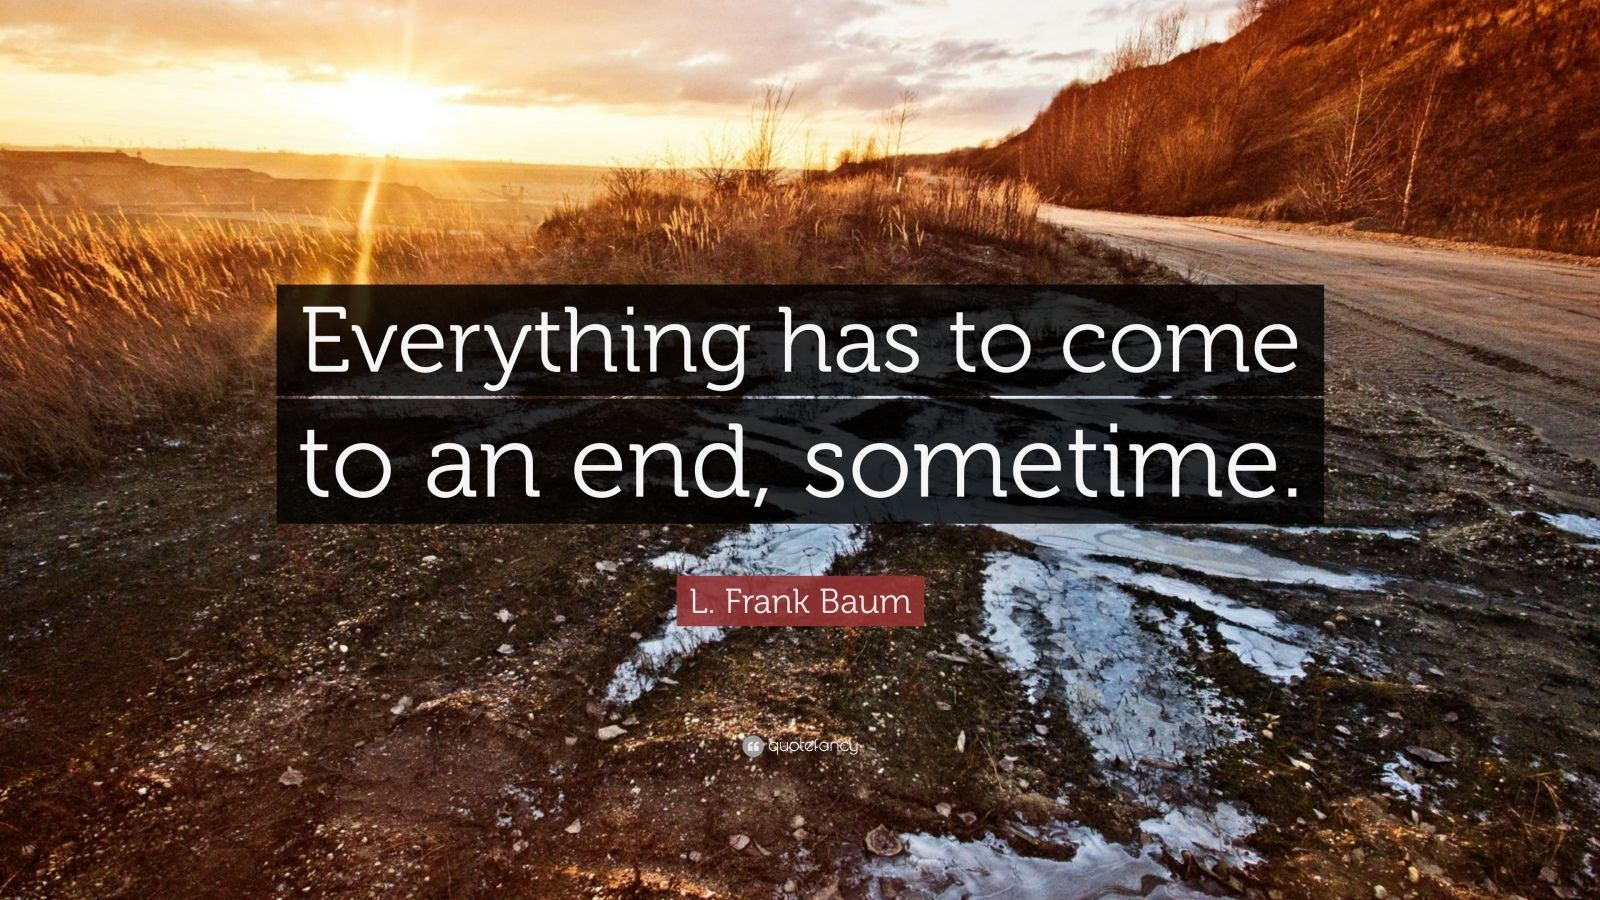 L. Frank Baum Quote “Everything has to come to an end, sometime.” (10